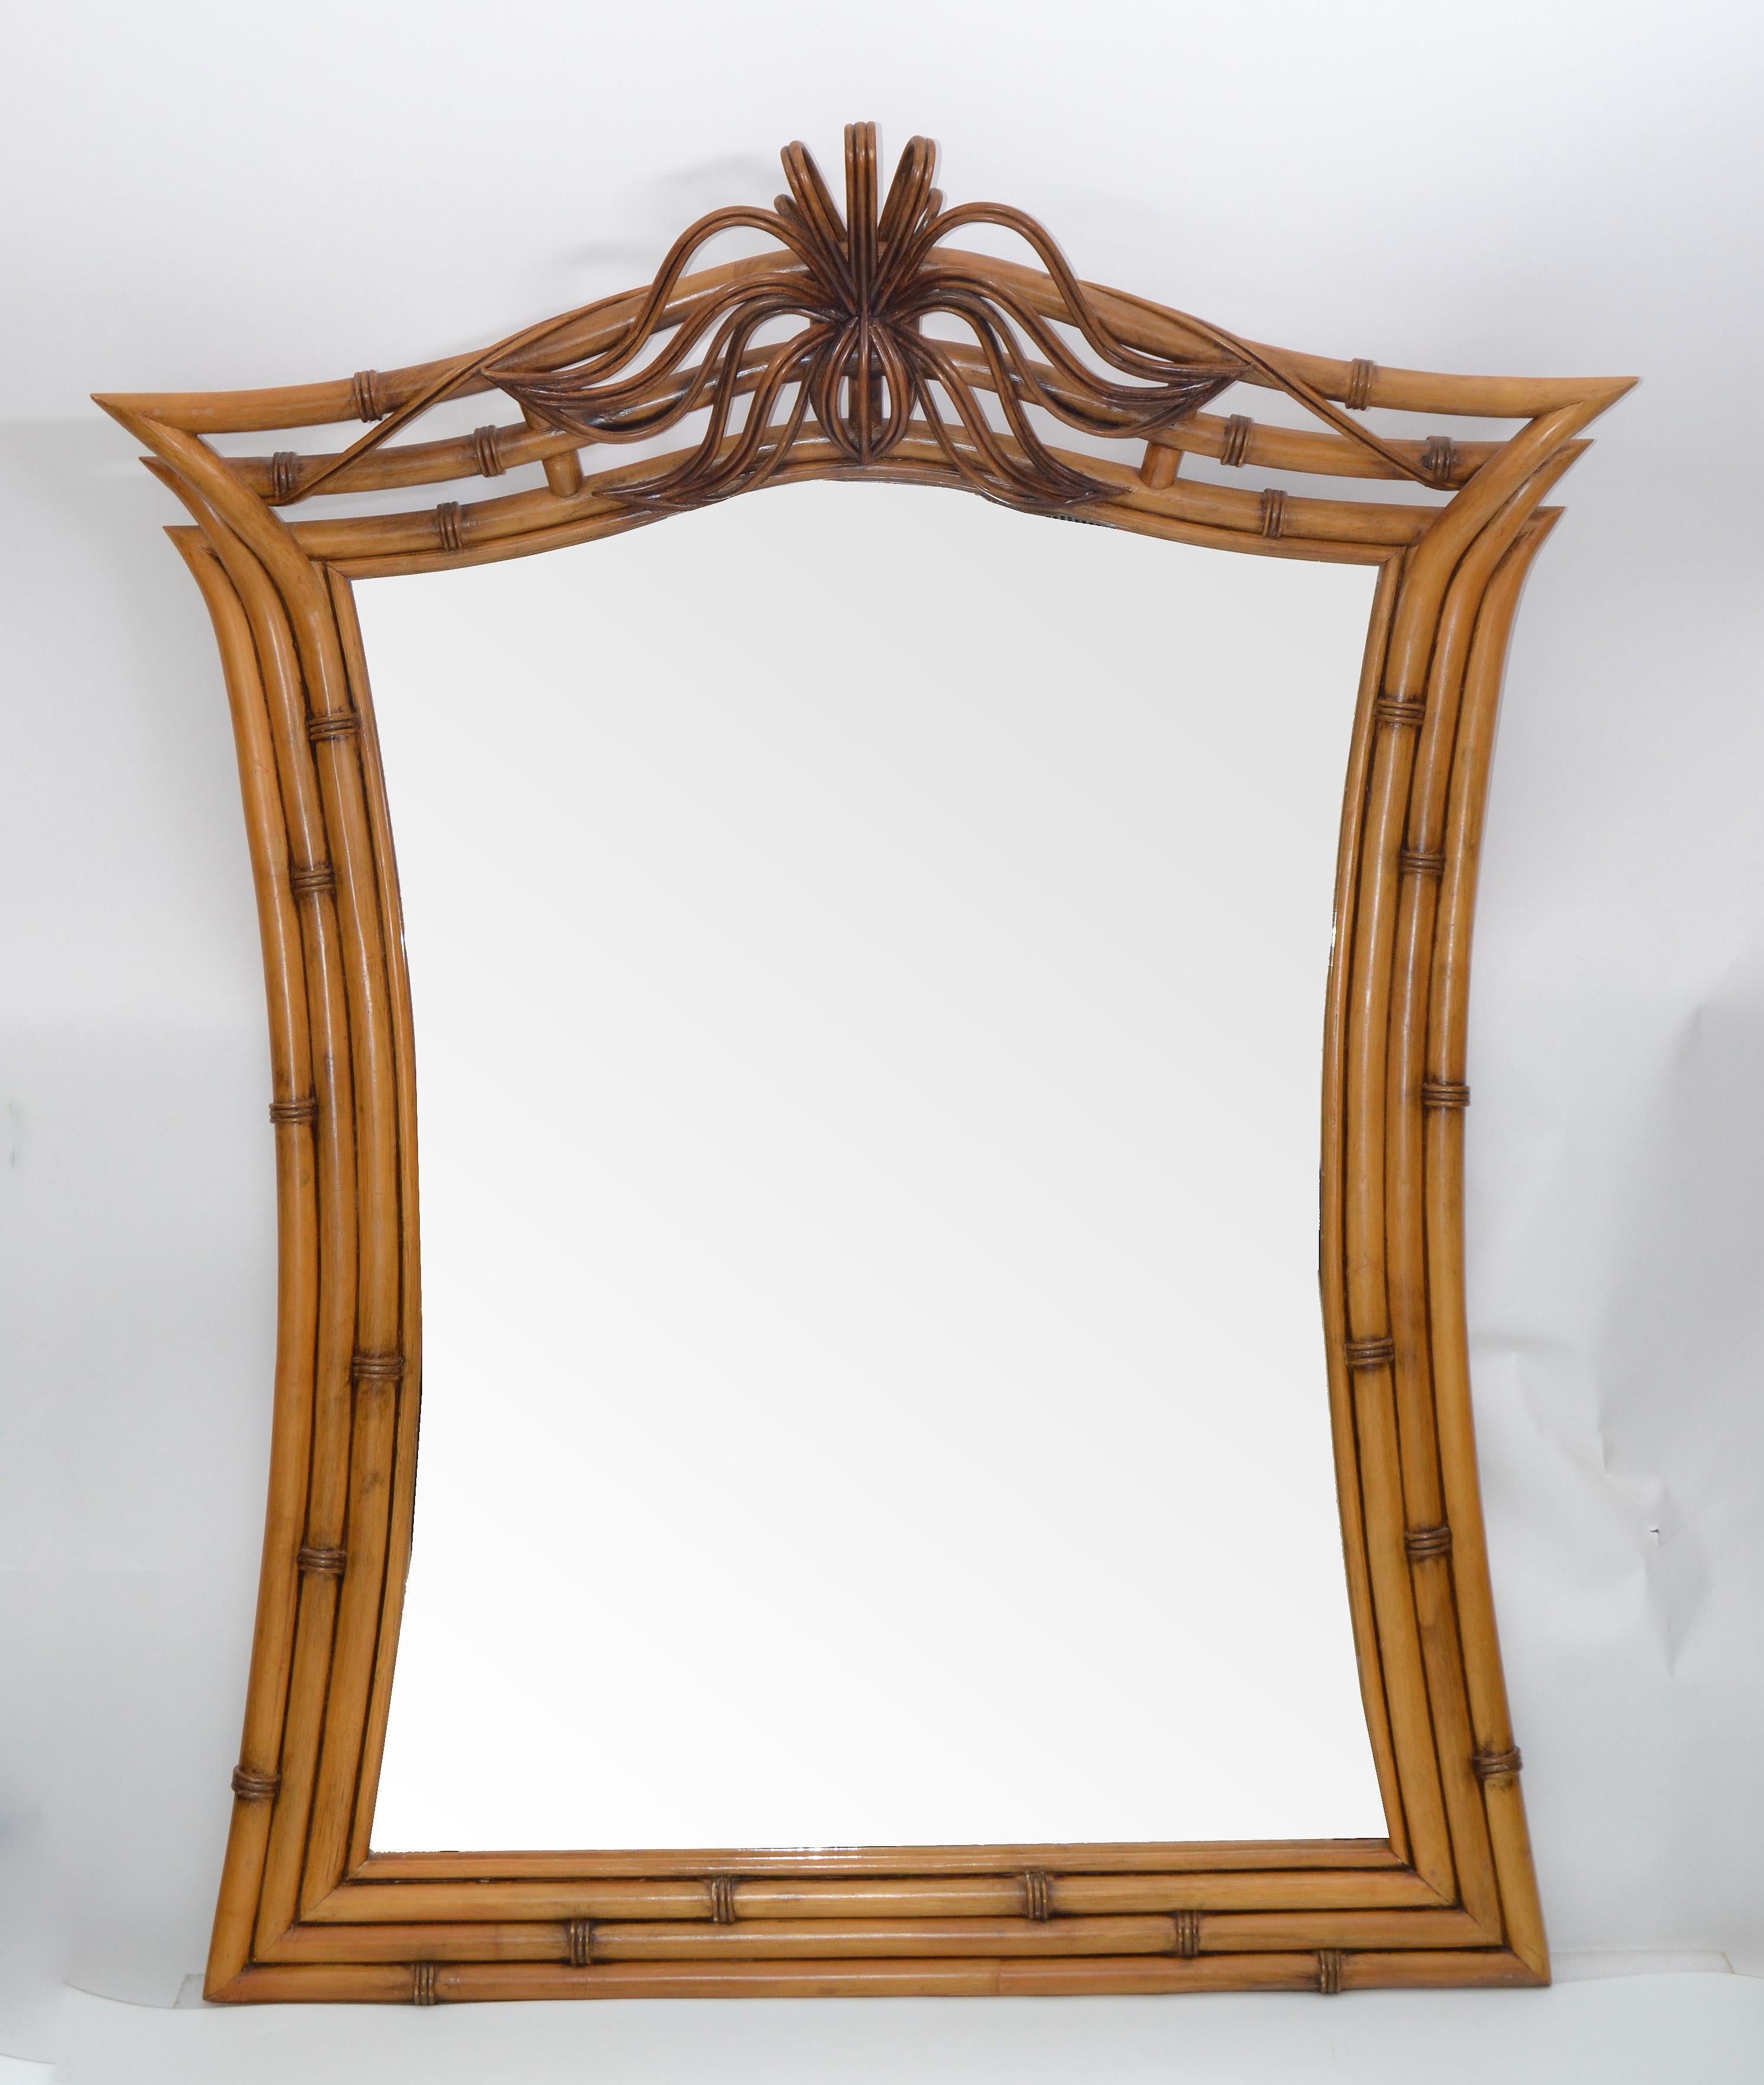 Bohemian Mid-Century Modern Framed Handcrafted Bamboo, Wood and Wicker Wall Mirror, 1960s For Sale